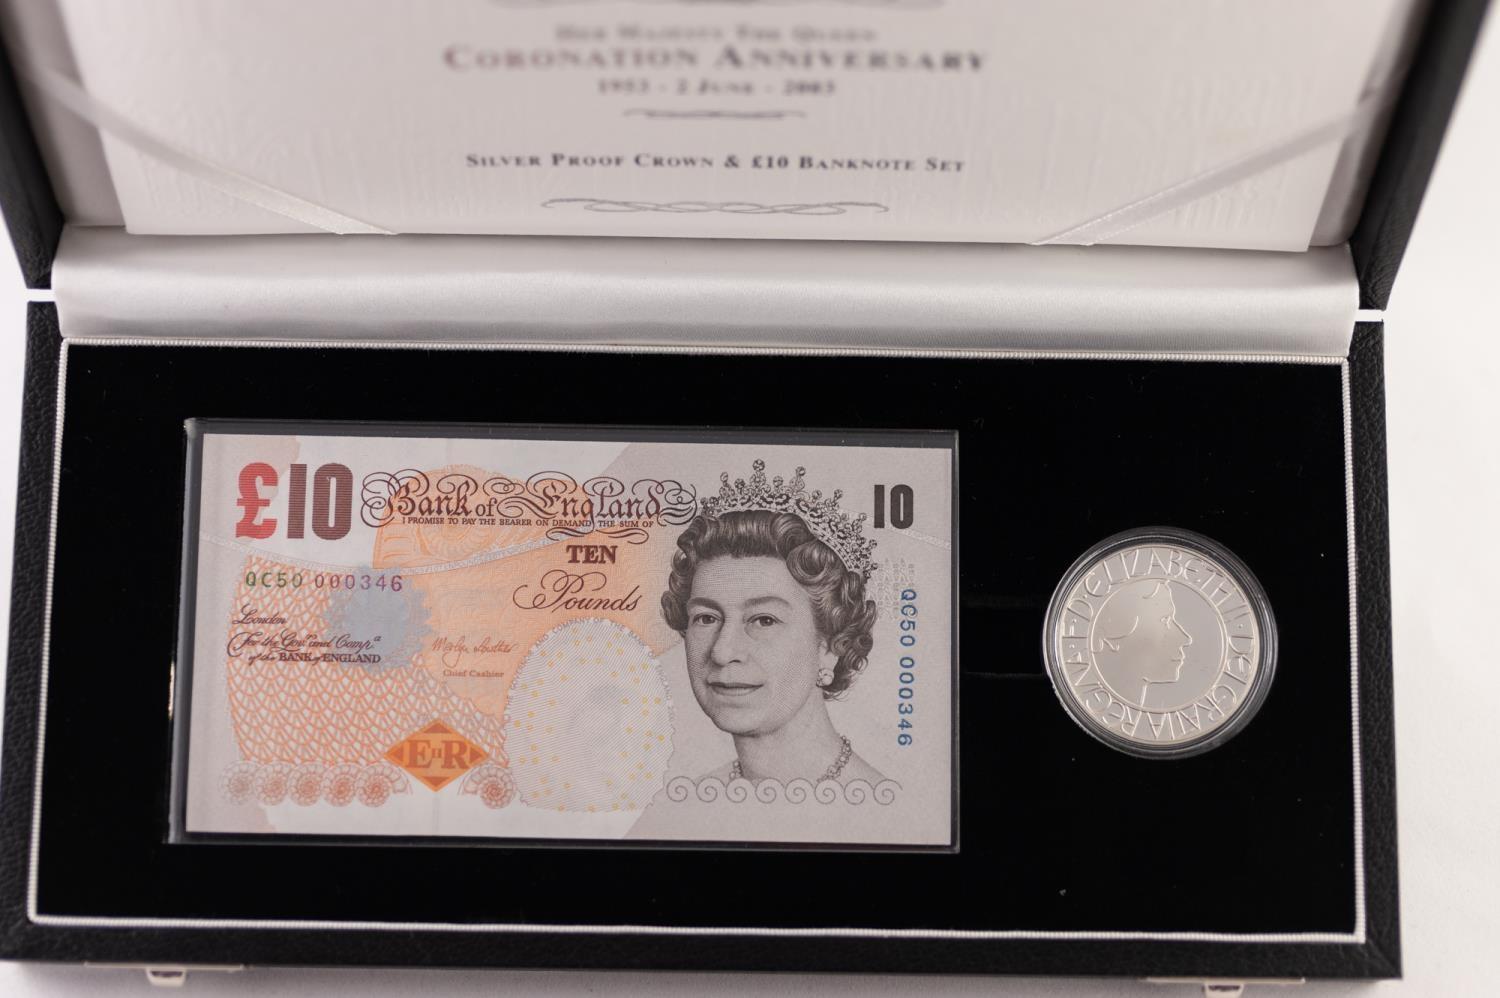 ELIZABETH II ROYAL MINT 2003 LIMITED EDITION PROOF SILVER CROWN AND TEN POUND BANKNOTE SET, - Image 2 of 2